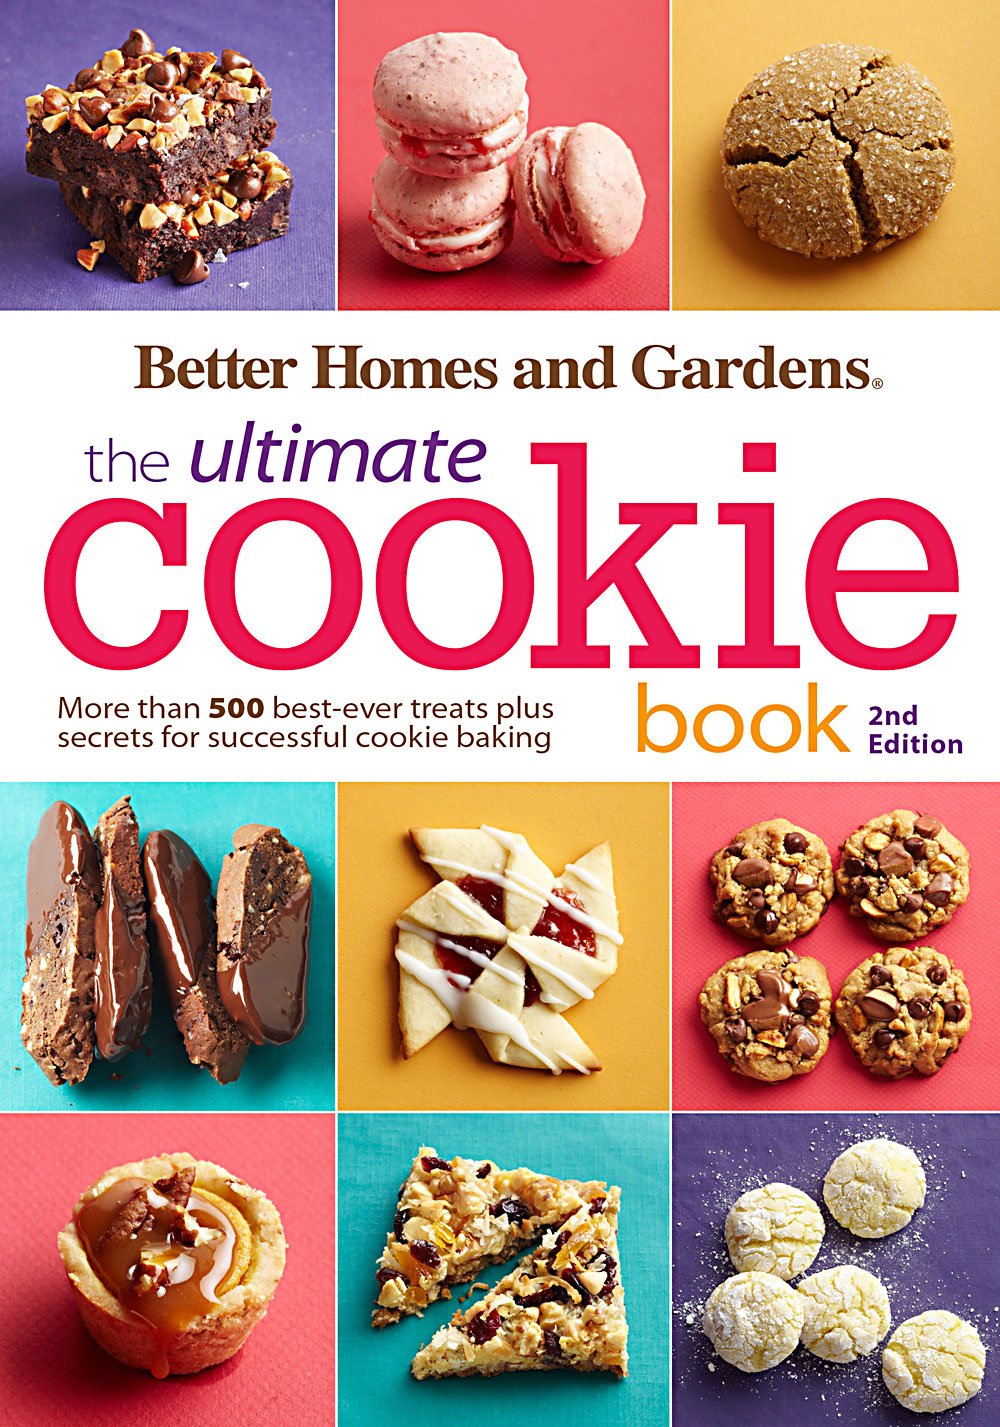 Review - Better Homes and Gardens Ultimate Cookie Book